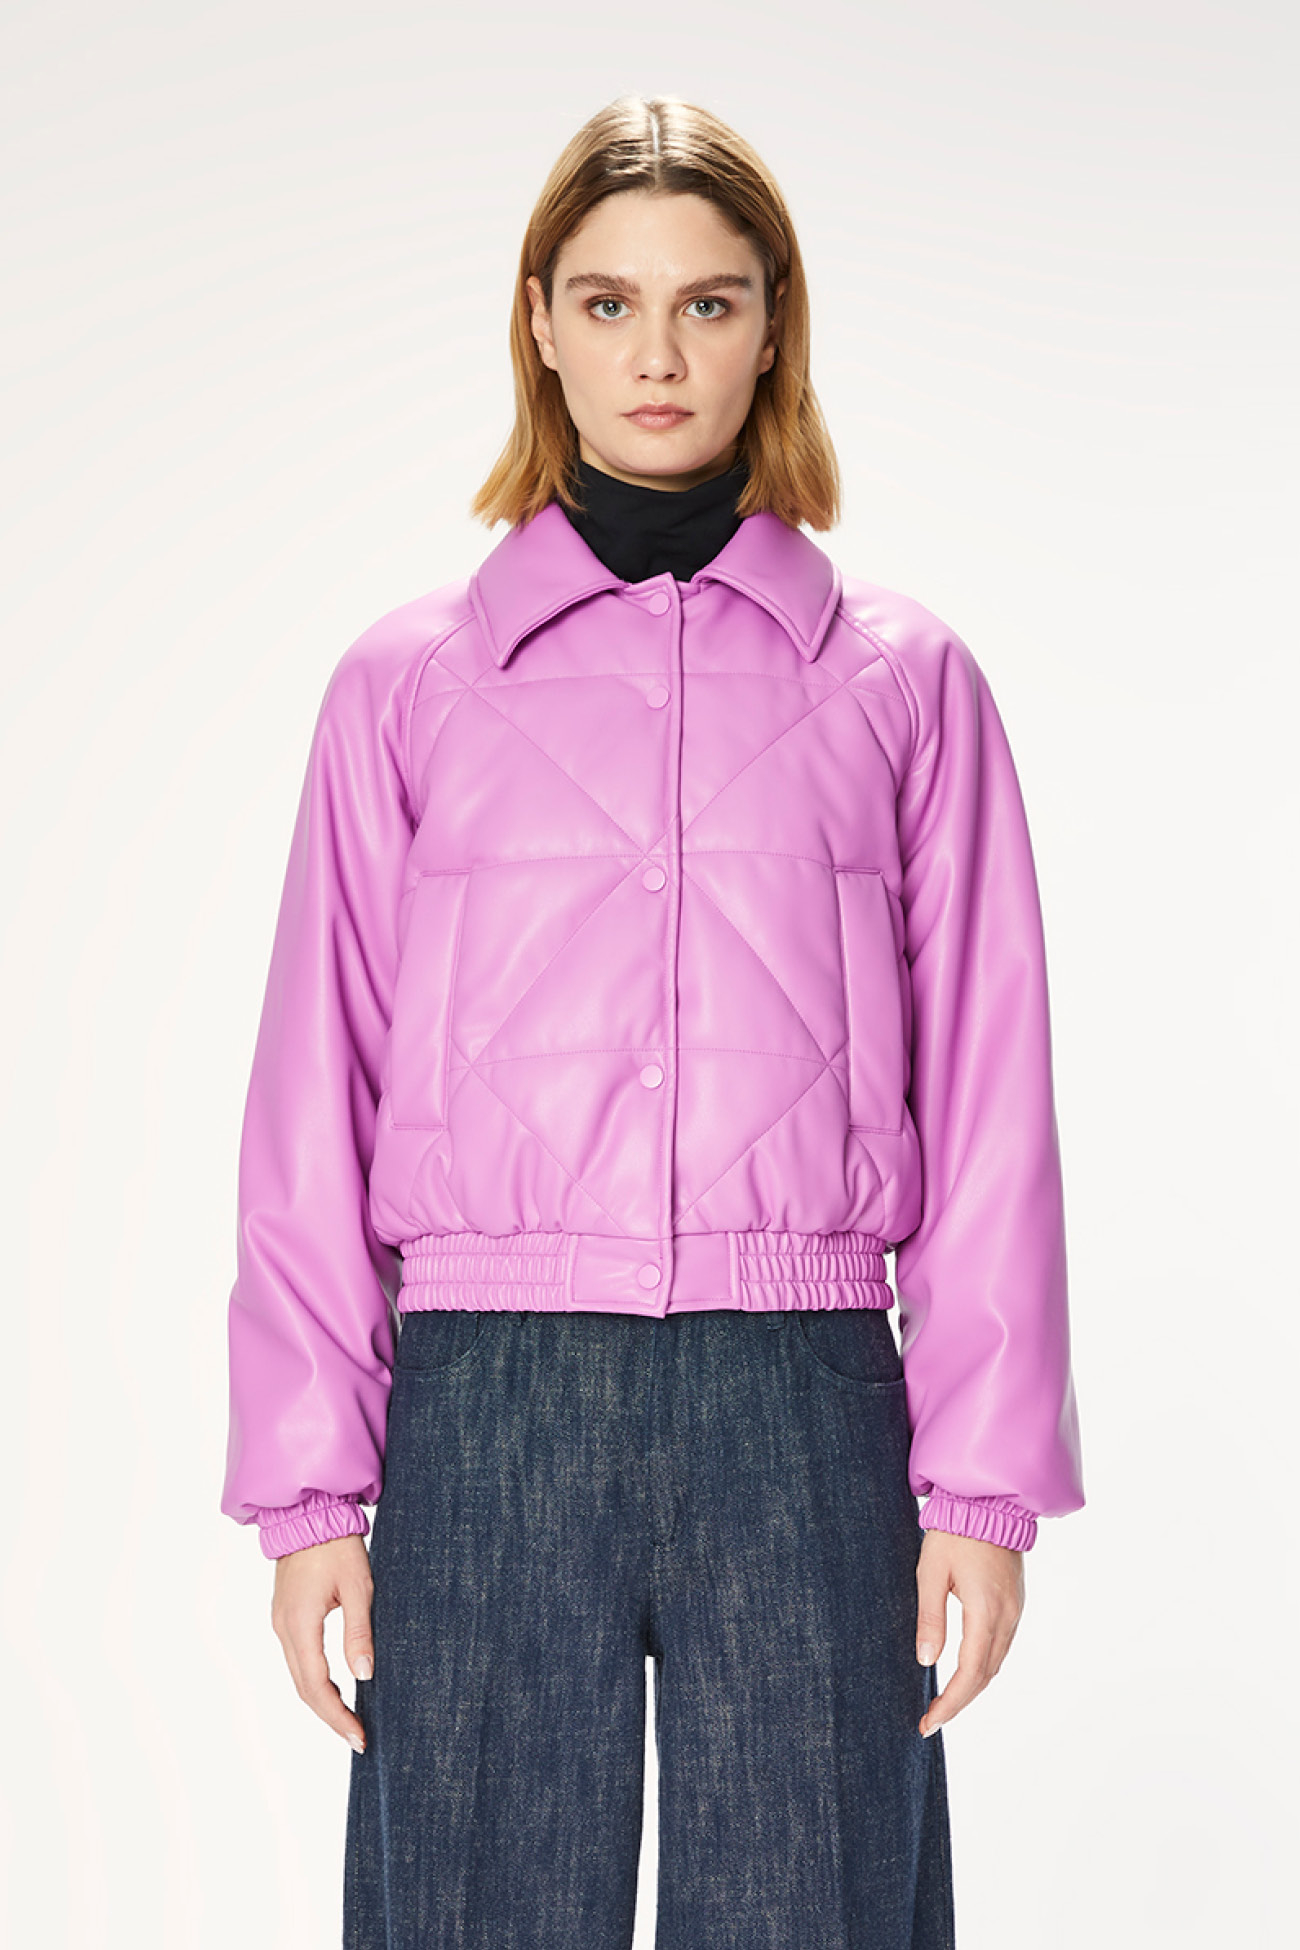 JACKET 9201 MADE IN ECO LEATHER - MAUVE - OOF WEAR